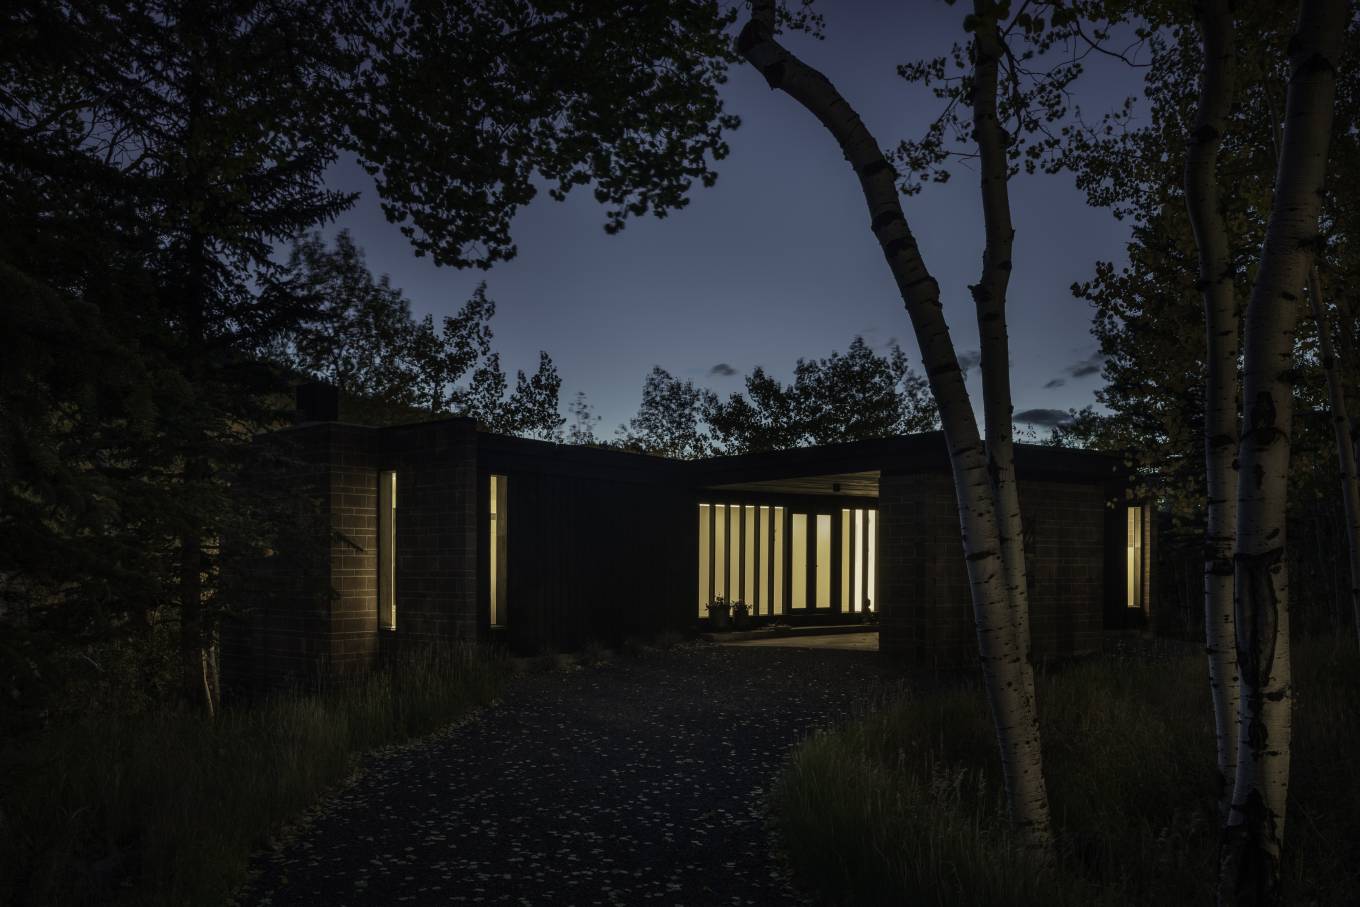 Originally constructed in 1968, this modest mid-century house was completely renovated and thrives in its surrounding aspen forest on a sloping hillside while enjoying the seasonal changes within its high-alpine landscape.